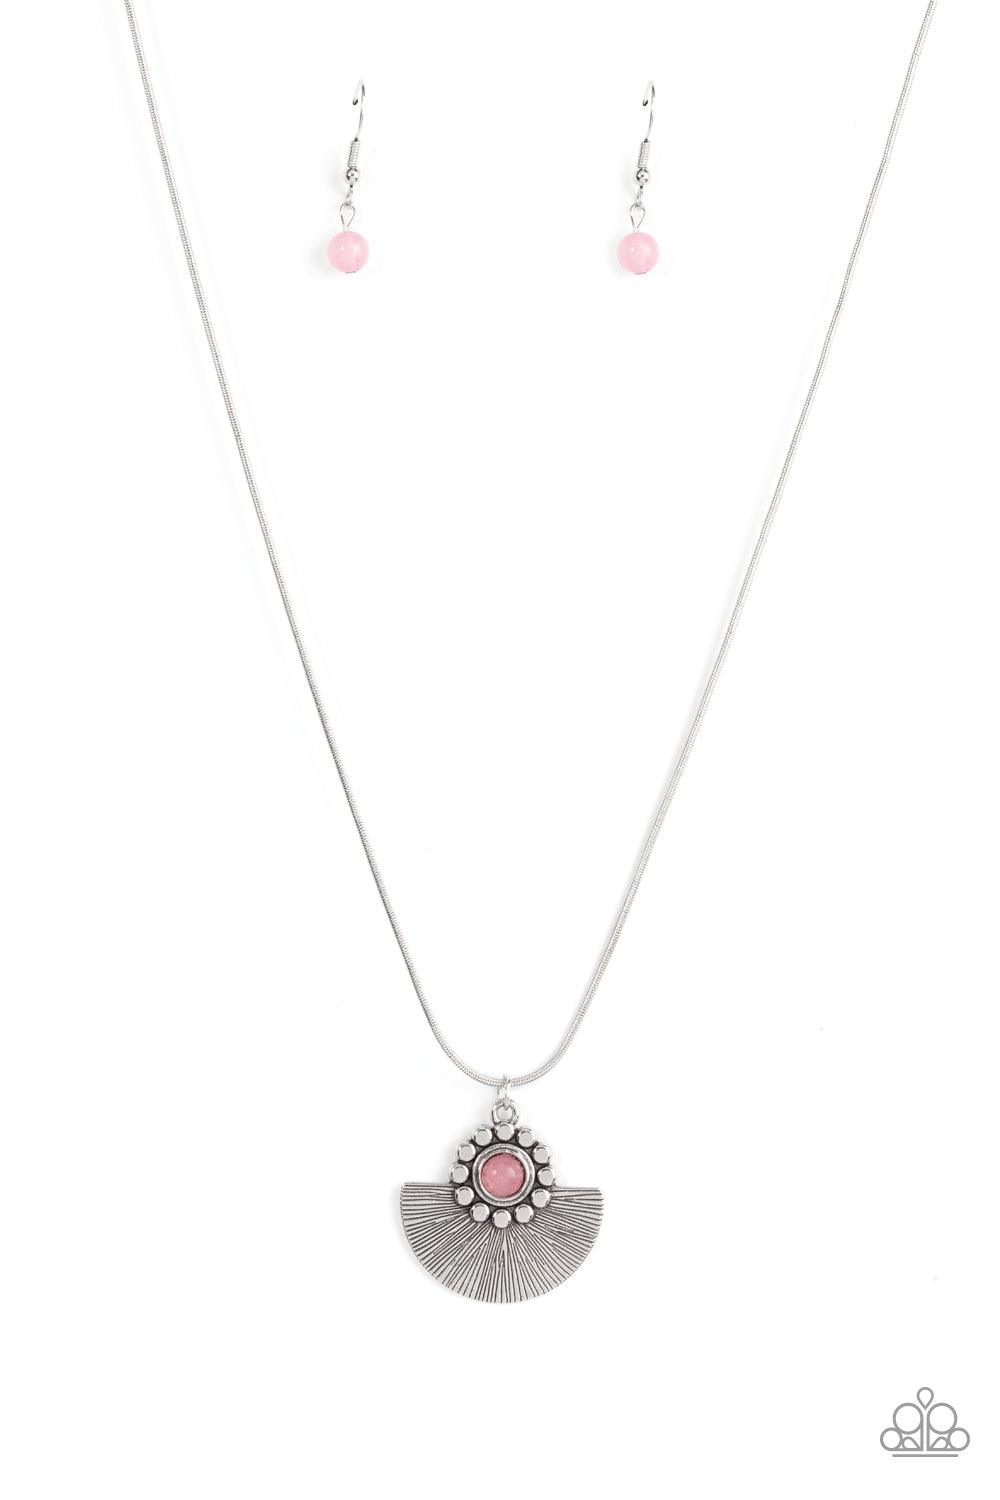 Paparazzi Accessories Magnificent Manifestation - Pink Bordered in a ring of flat silver studs, a mystical pink bead adorns the top of a textured silver half moon pendant that glides along a rounded silver snake chain for an ethereal fashion. Features an